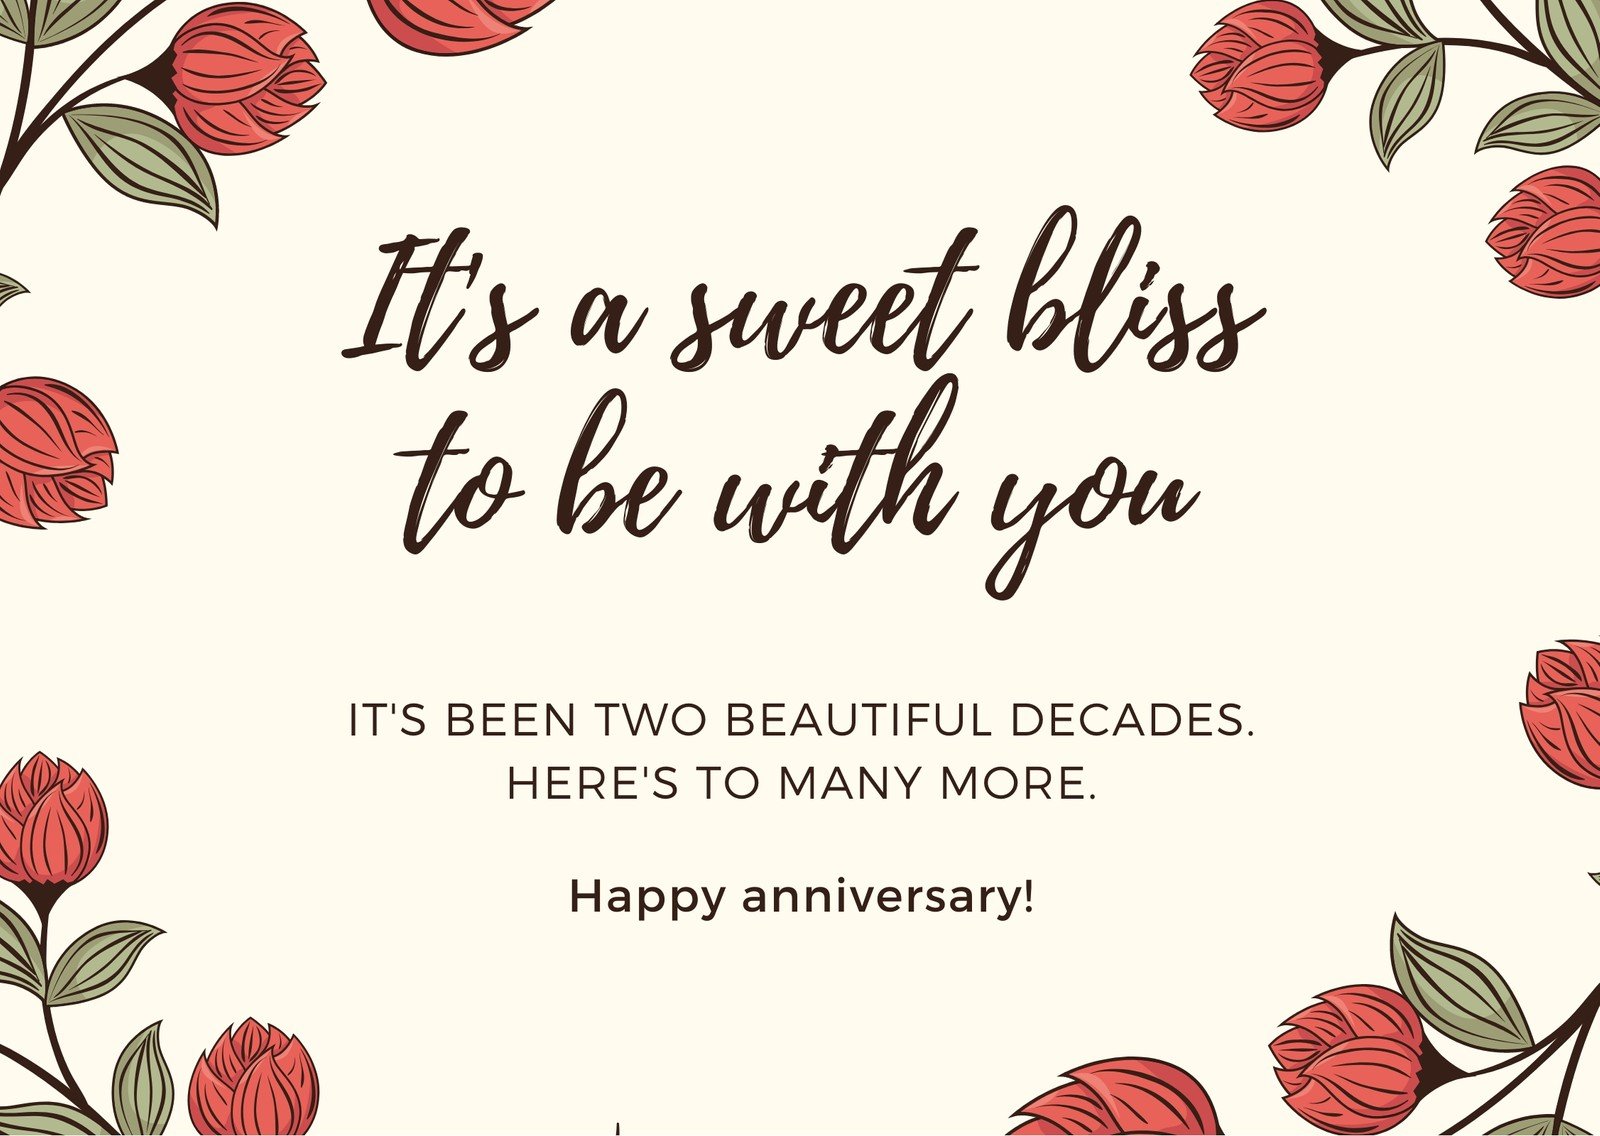 word-templates-happy-anniversary-cards